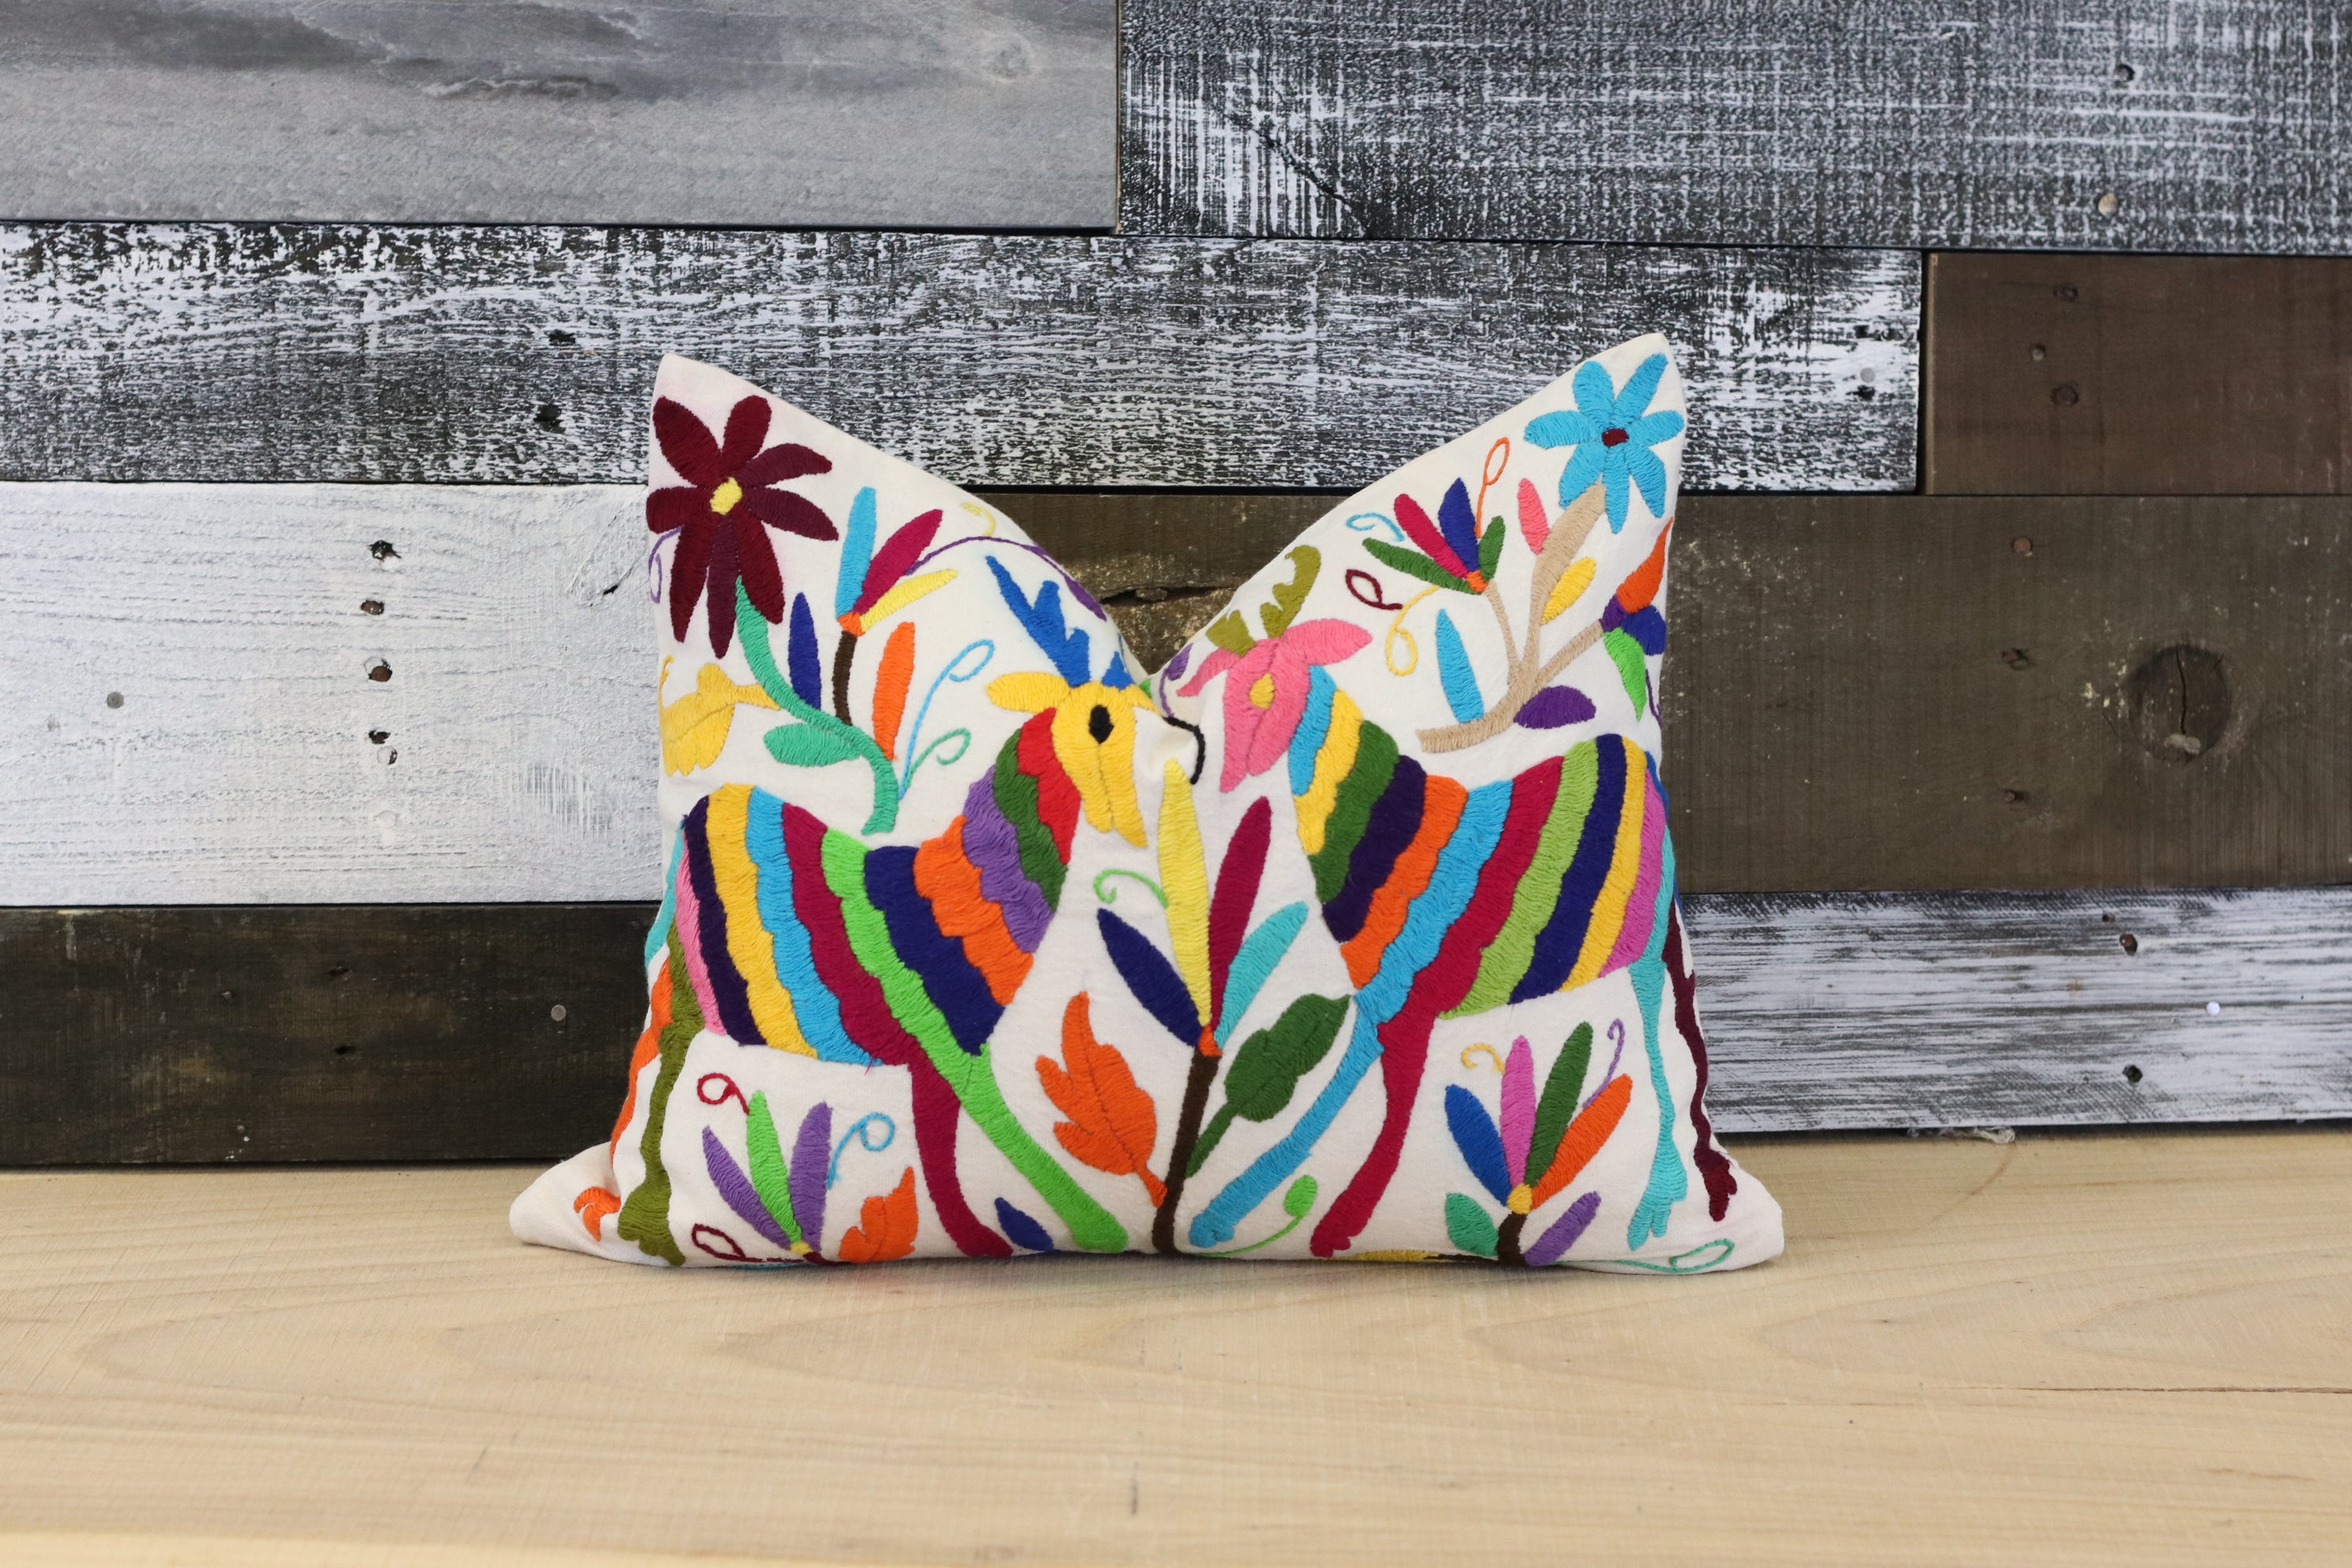 Otomi Tenango Pillow Cover Hand Embroidered with Flowers and Animals in Vibrant Colors. Handmade in Mexico. Ships from the USA. Buy now at www.felipeandgrace.com. 